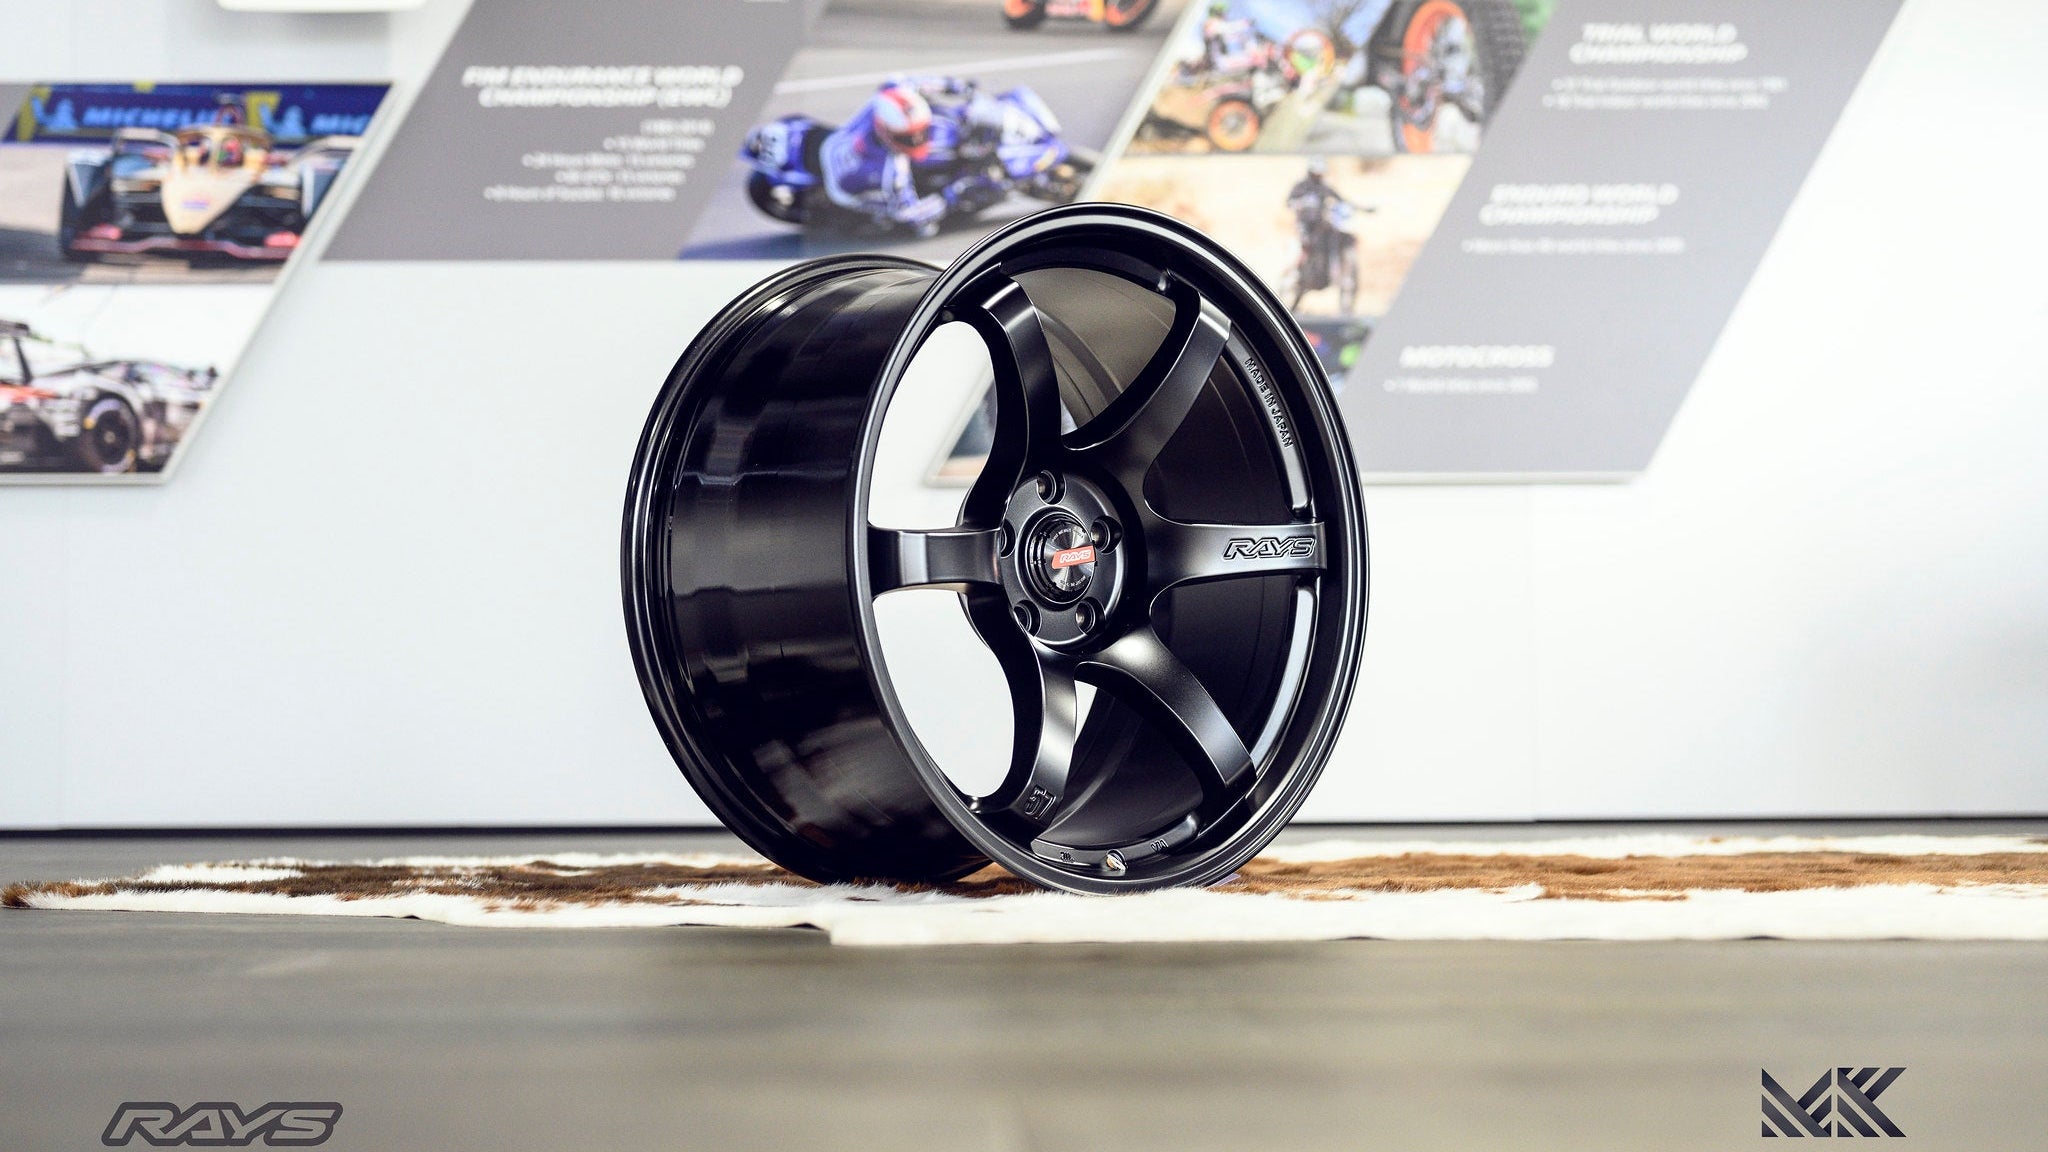 gramLIGHTS 57DR 17" - Premium Wheels from Gram Lights - From just $2000.0! Shop now at MK MOTORSPORTS